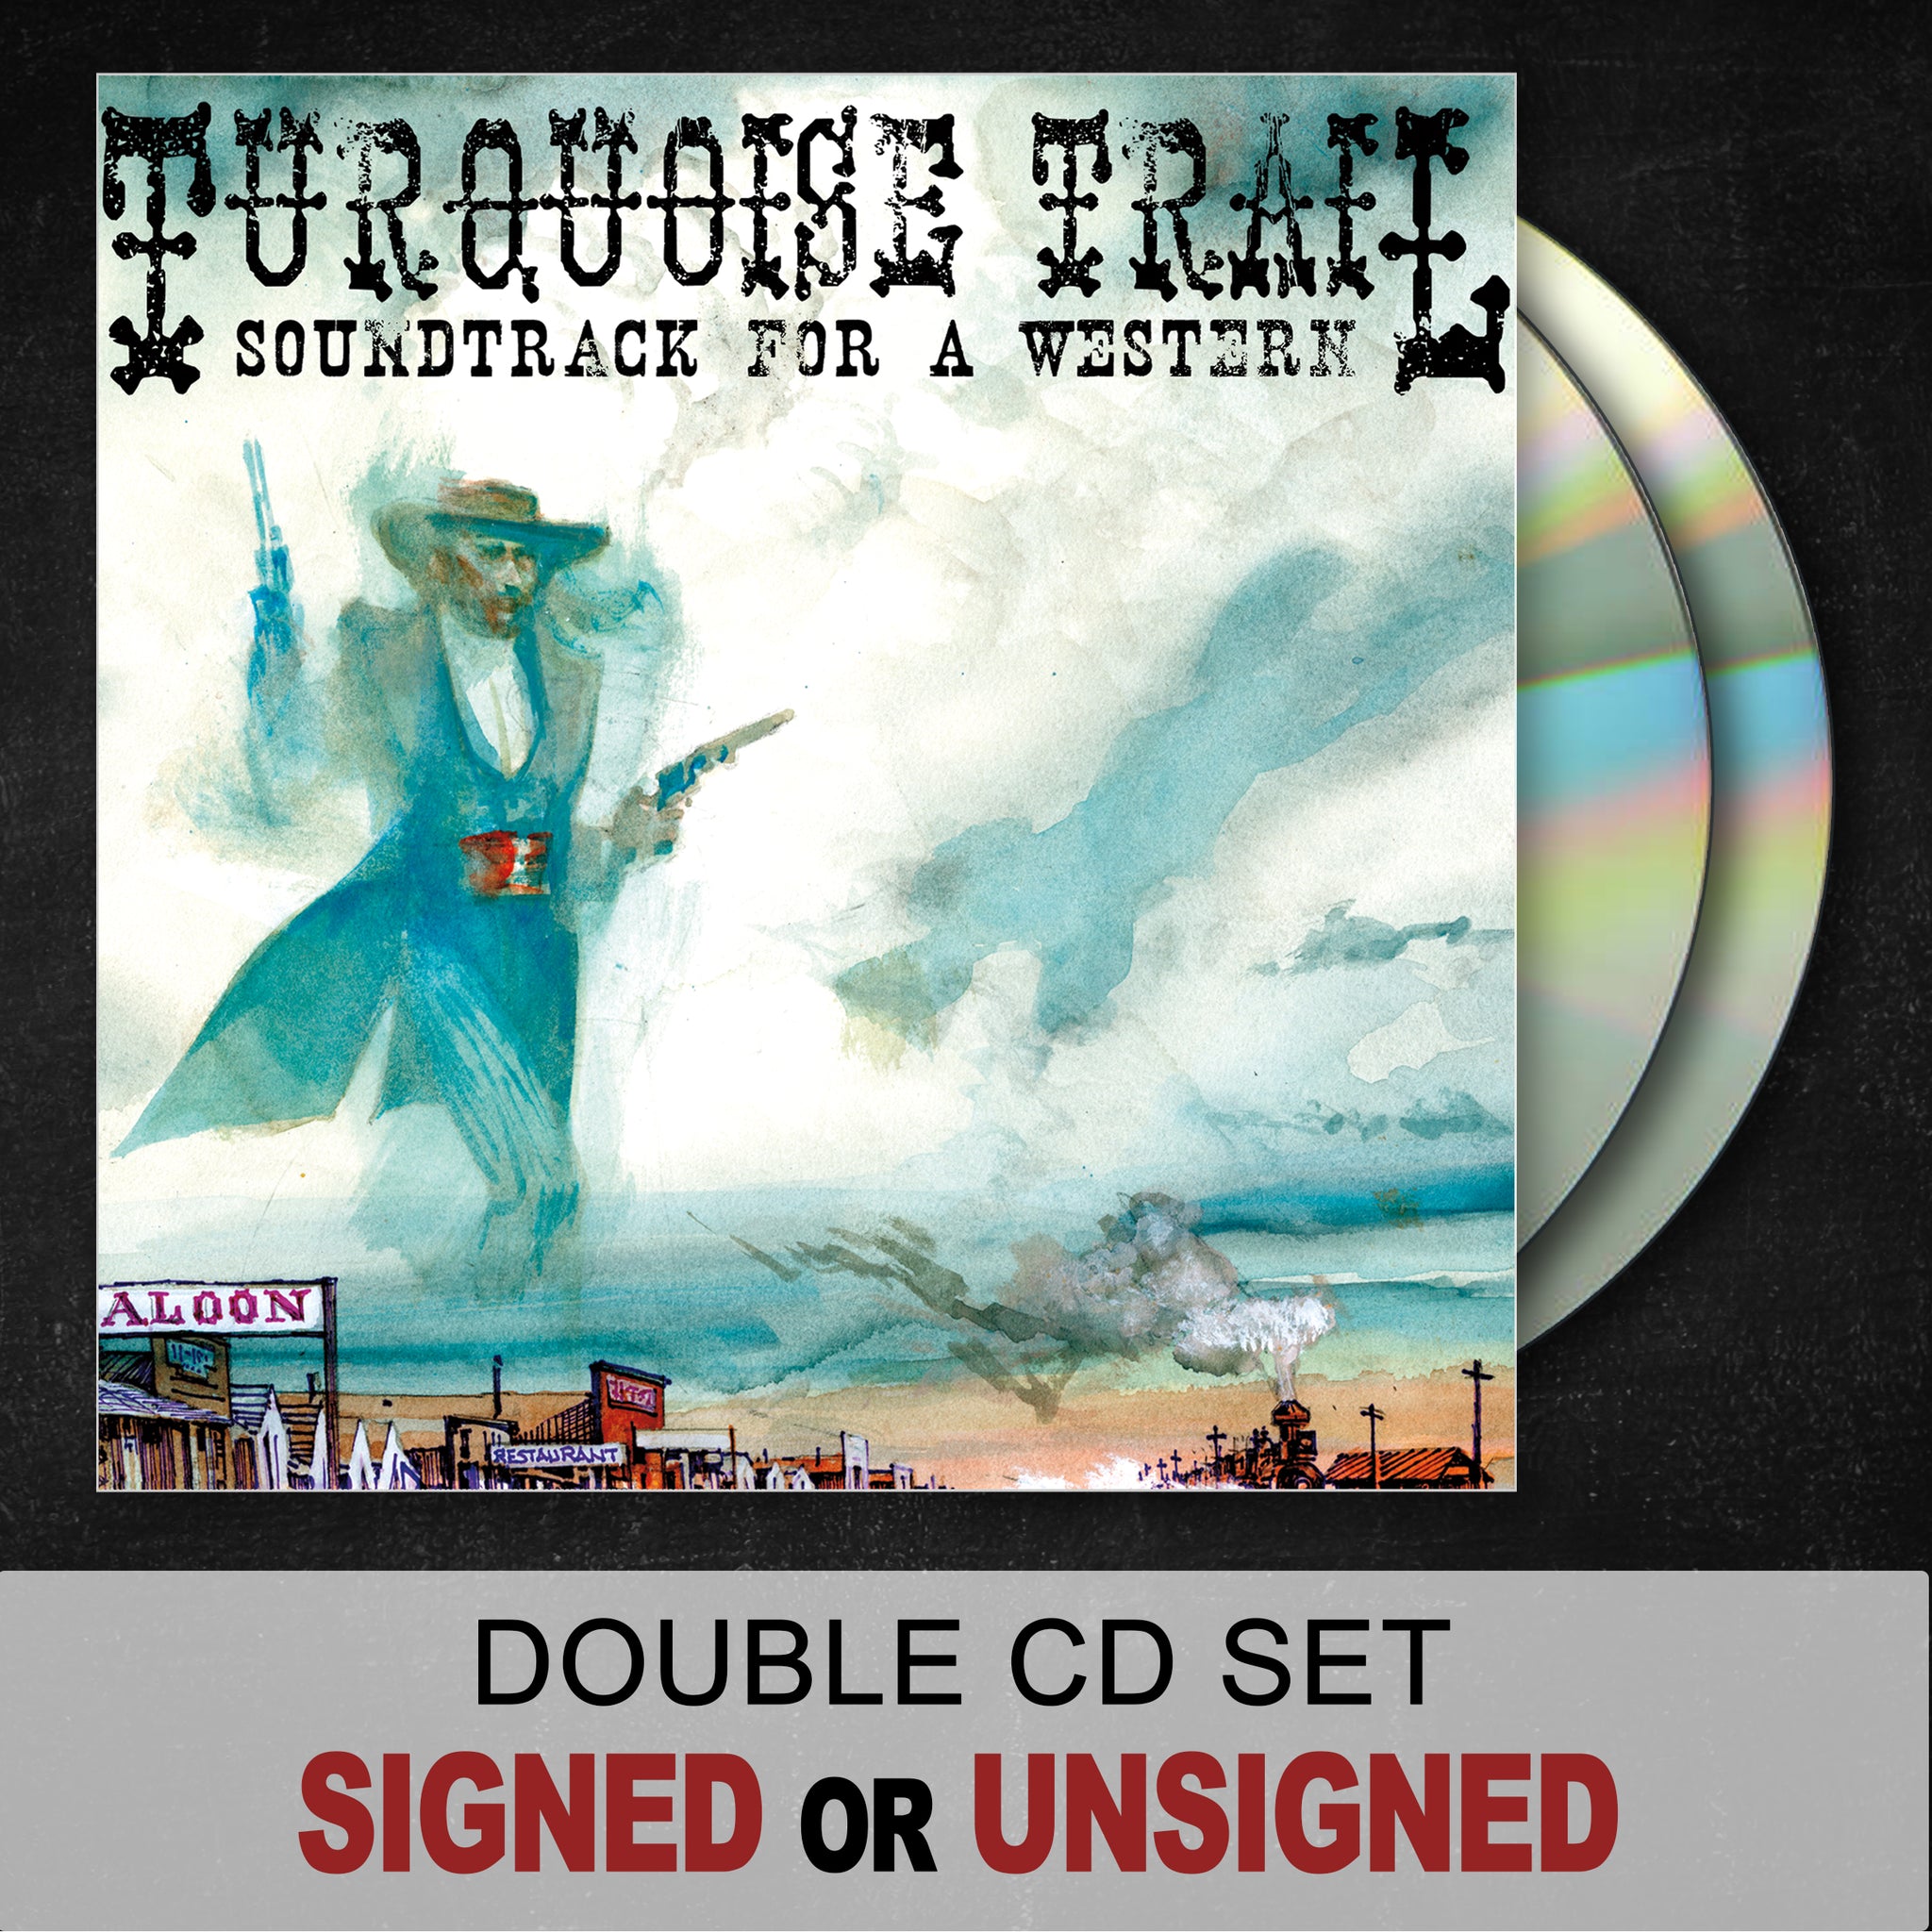 "Turquoise Trail: Soundtrack for a Western" SIGNED OR UNSIGNED DOUBLE CD